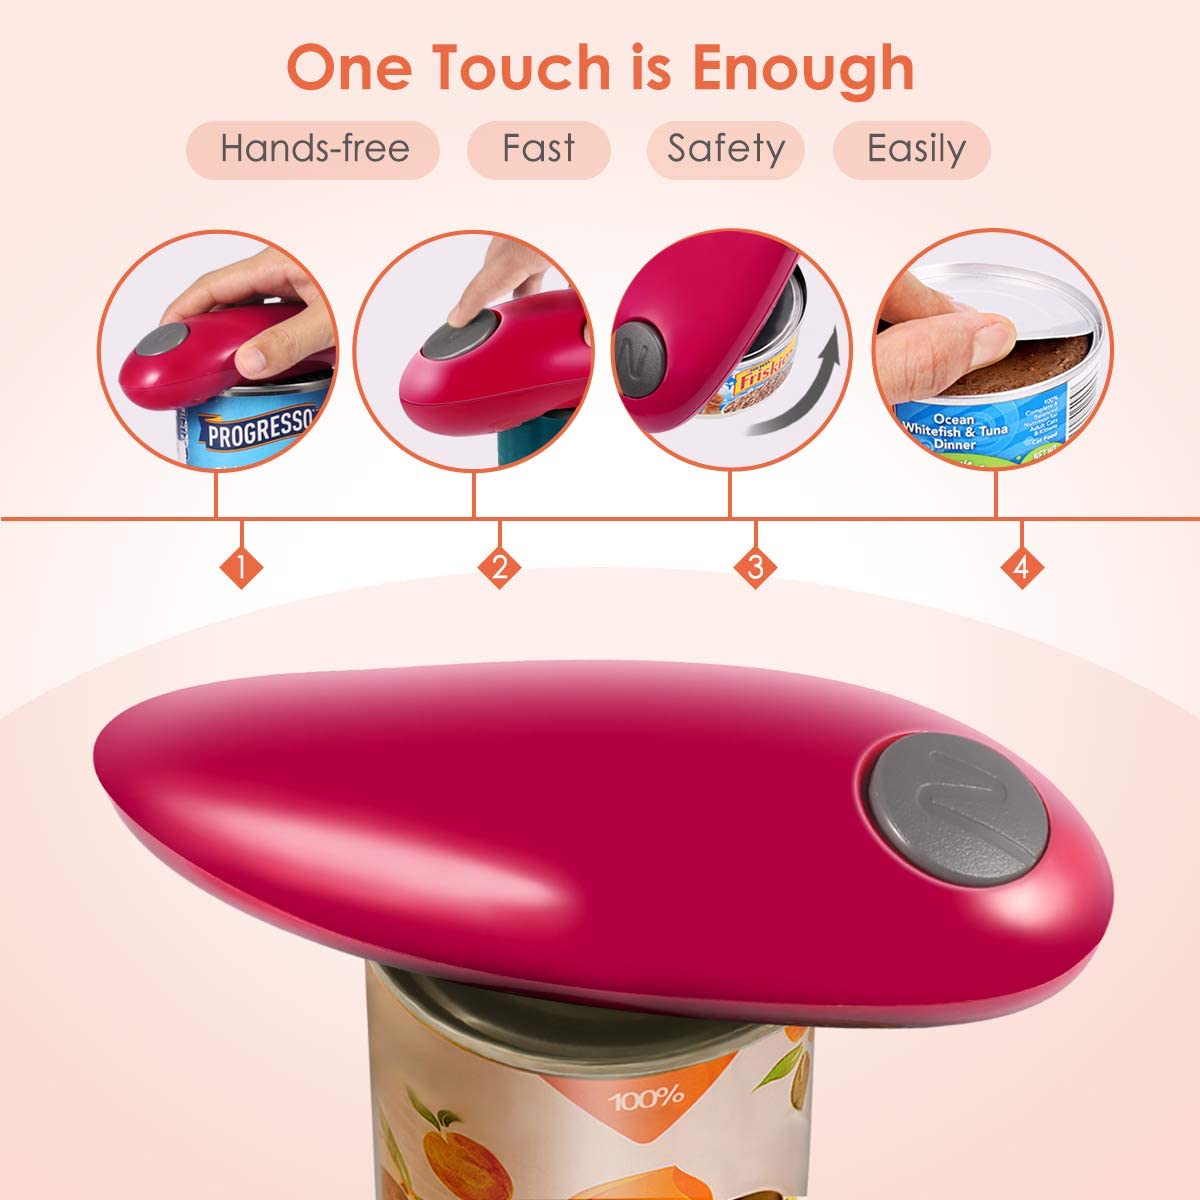 Electric Can Opener, Battery Operated Electric Can Openers for Kitchen, One Touch Automatic Can Opener Smooth Edge, Best Choice Can Opener Electric for Seniors with Arthritis, Kids, Cooks, Housewives